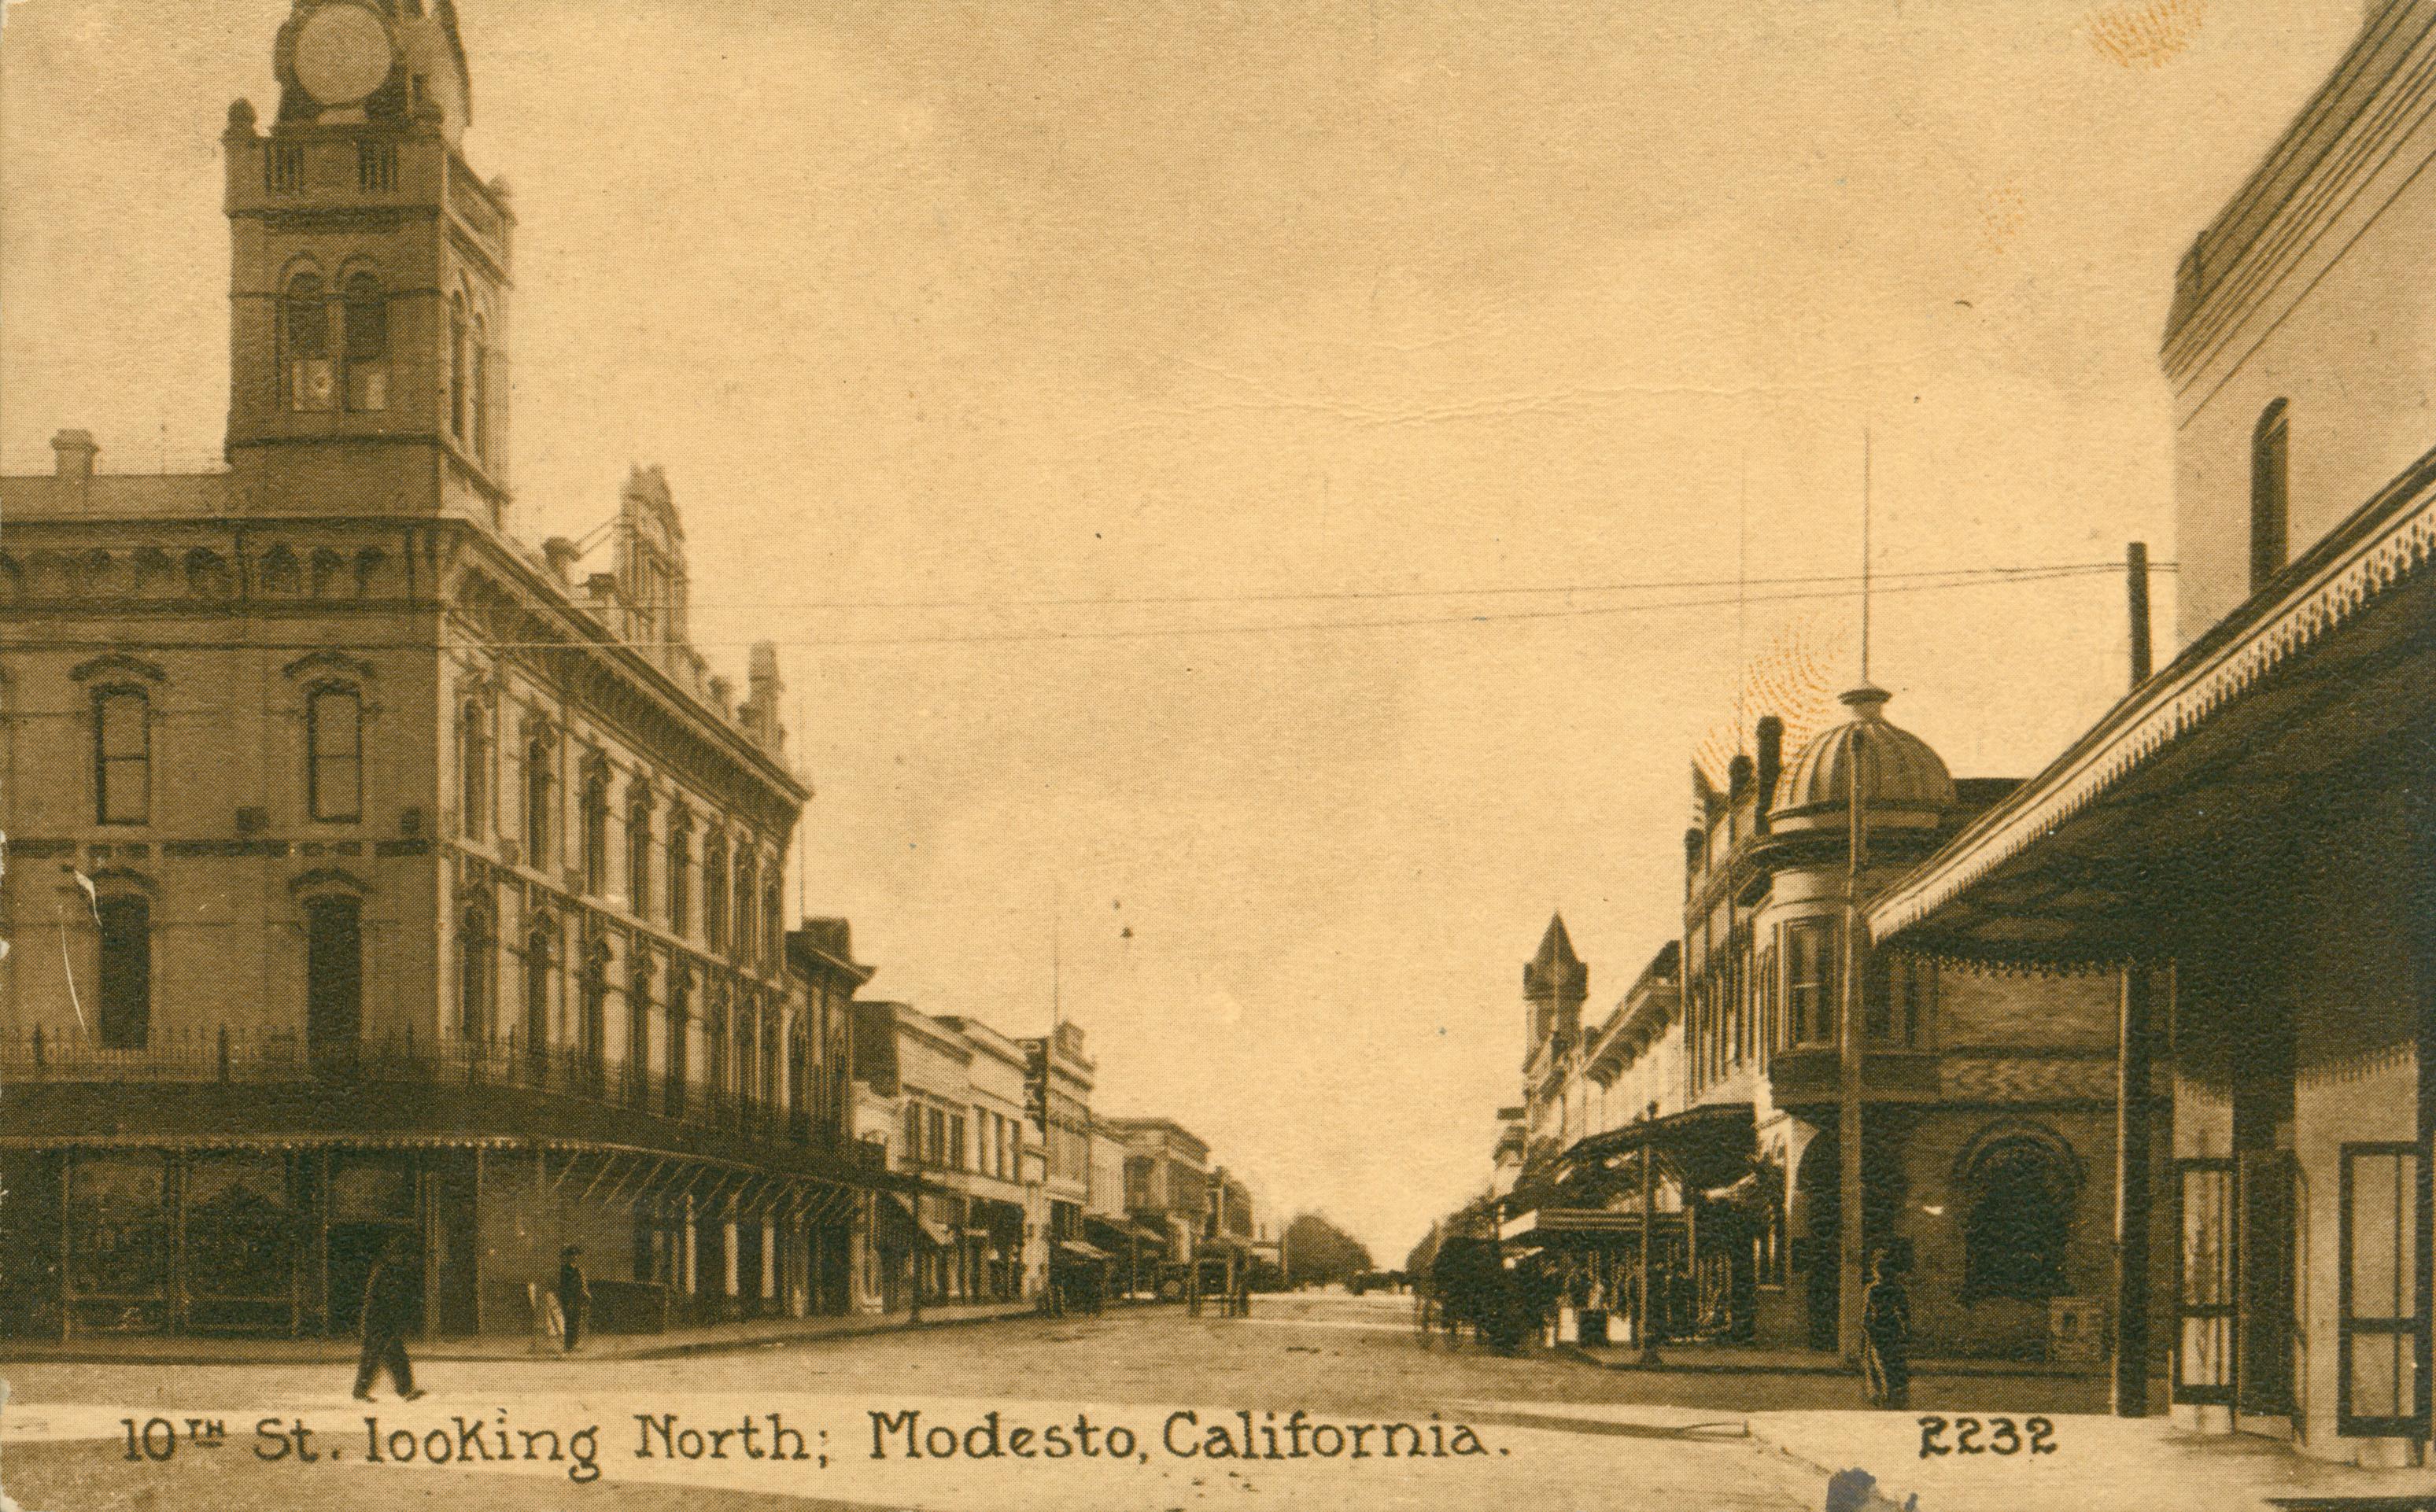 Shows Tenth Street in Modesto lined with buildings